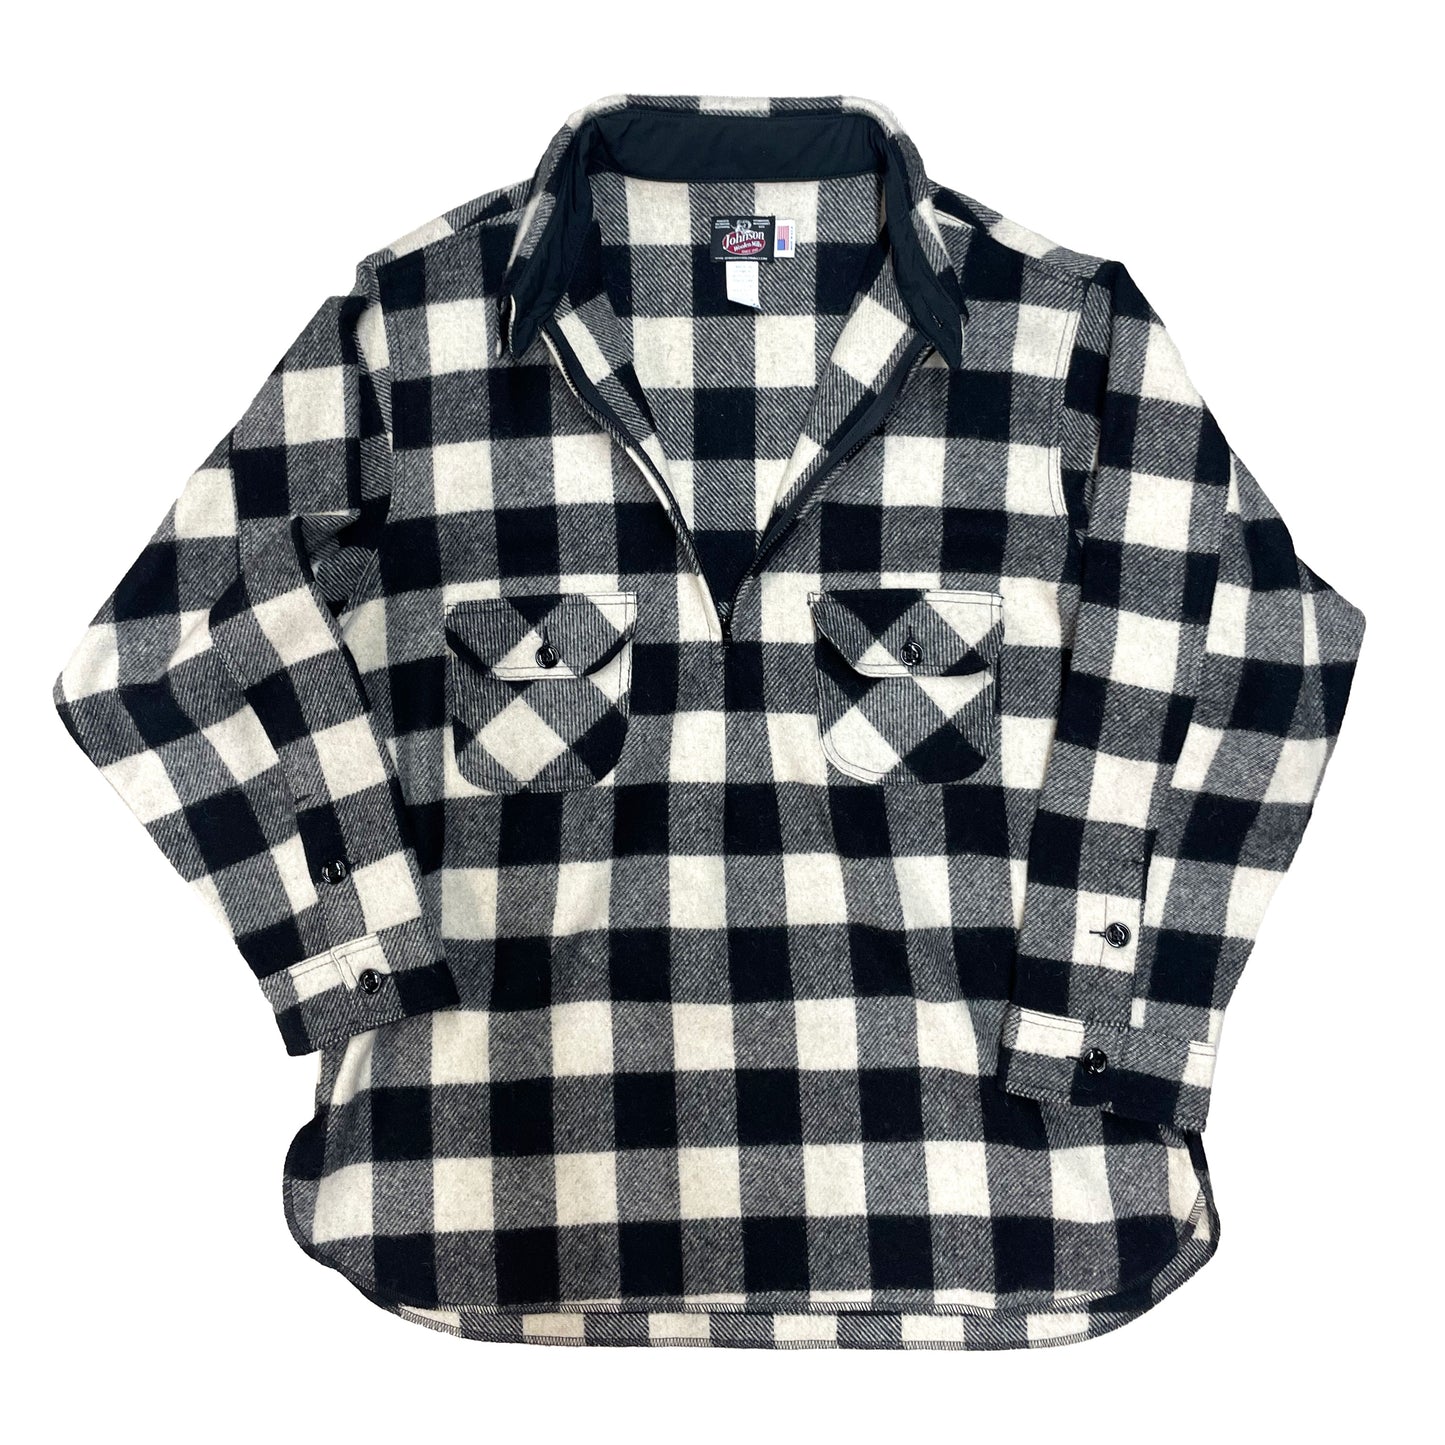 Half Zip Wool shirt - pull over design with a long rounded tail, half zip and two chest pockets. Shown in white and black buffalo plaid. zipper down